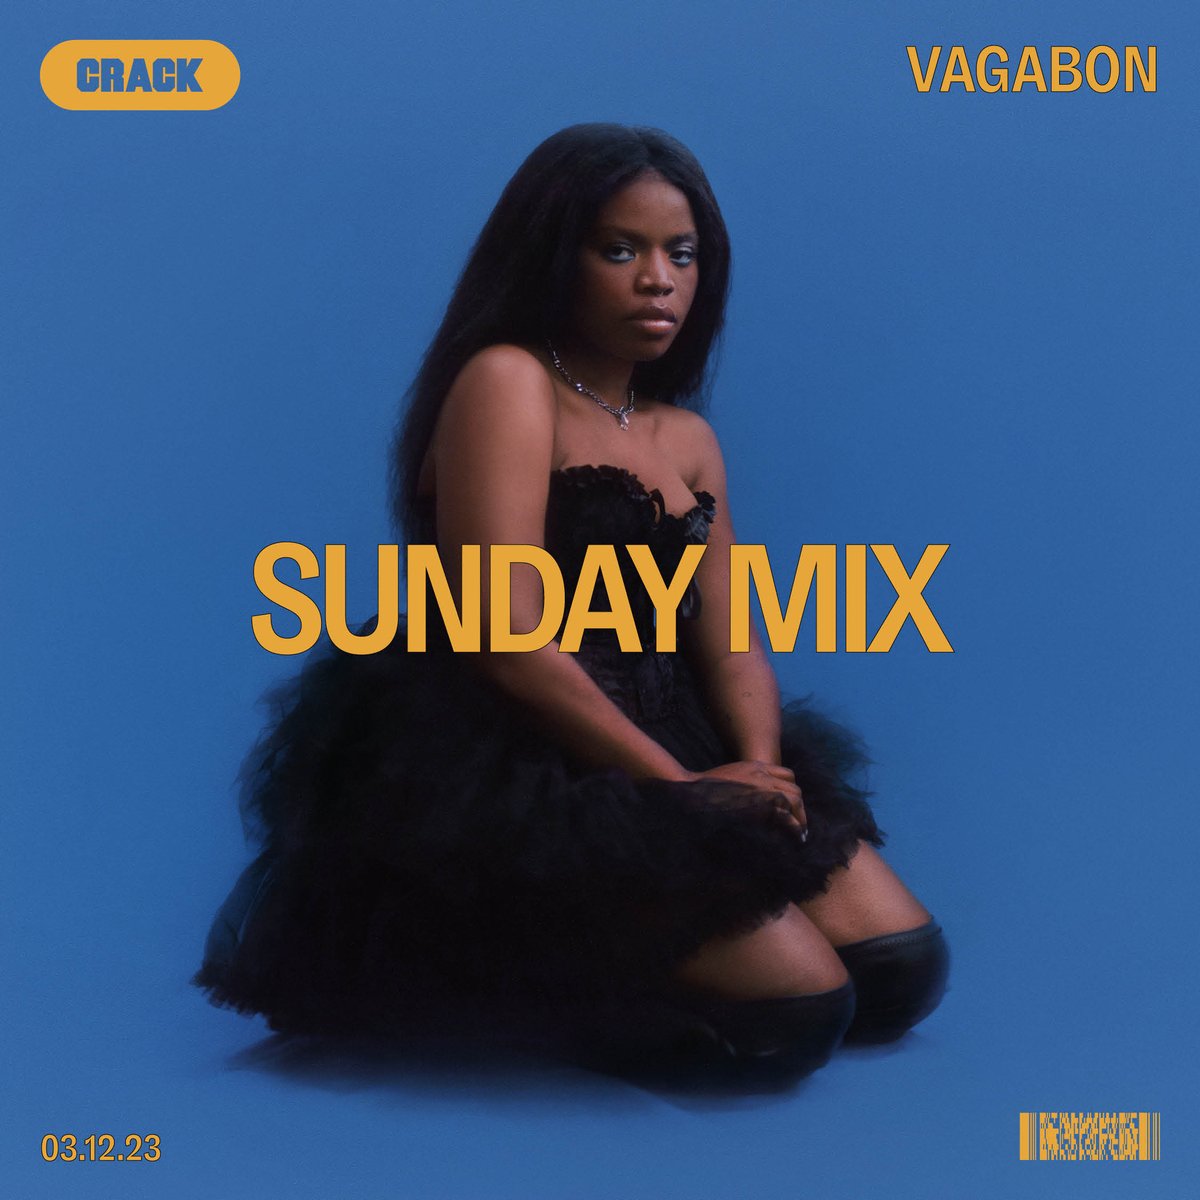 For the Sunday Mix series, @vagabonvagabon shares an upbeat collection of sounds and songs that give her pep and vigour on unhurried days. Ideal weekend listening. Hit play: crackm.ag/3Rqmuev